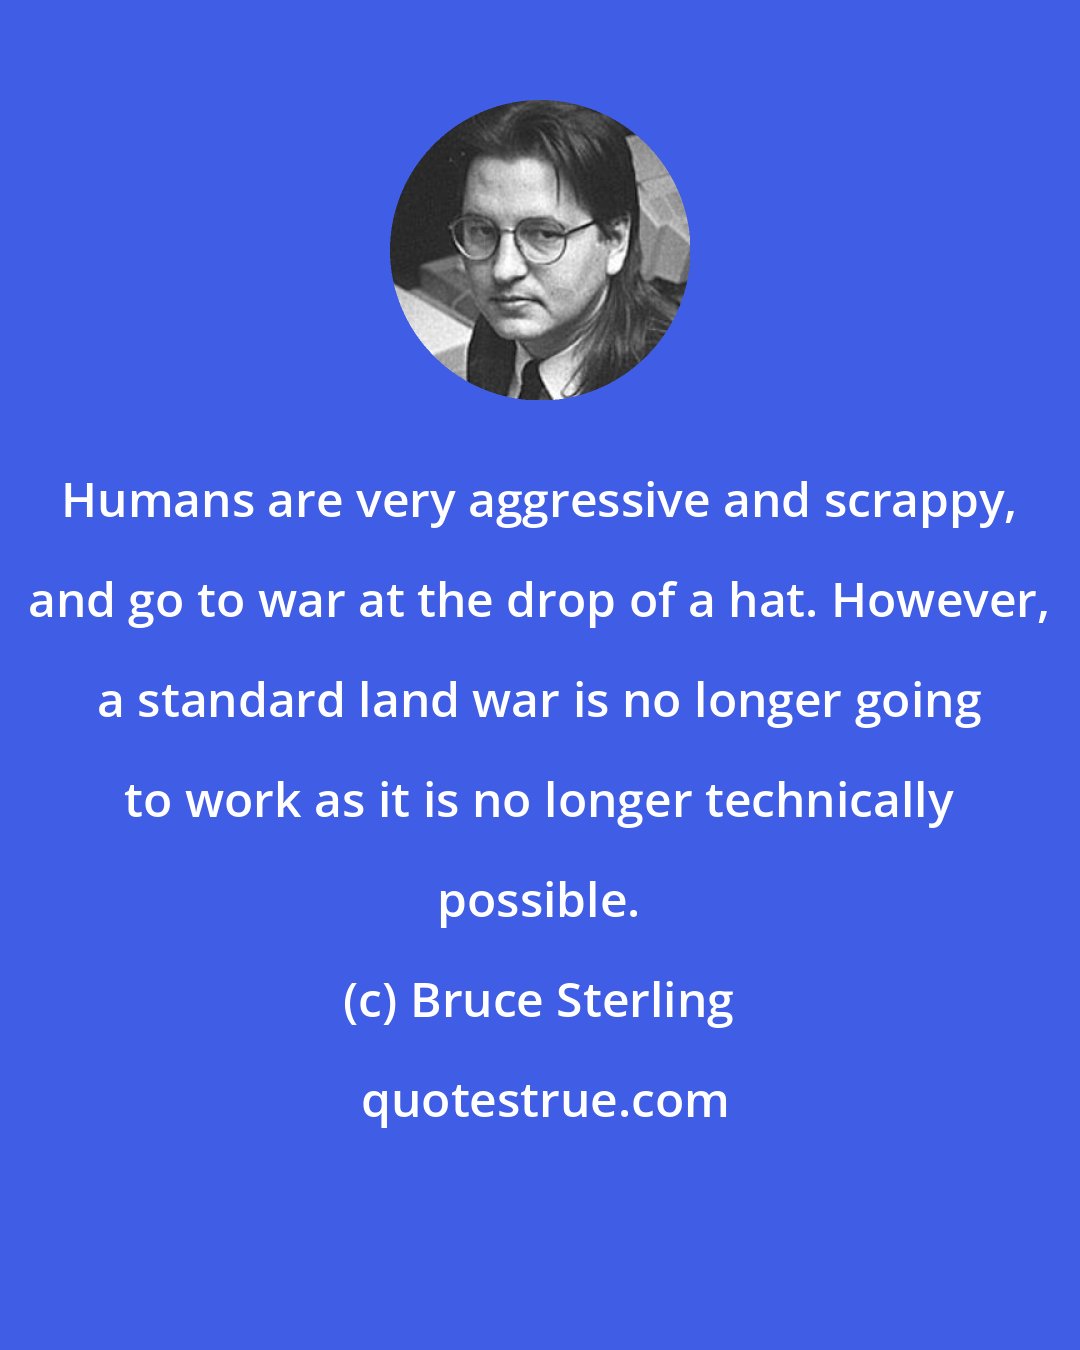 Bruce Sterling: Humans are very aggressive and scrappy, and go to war at the drop of a hat. However, a standard land war is no longer going to work as it is no longer technically possible.